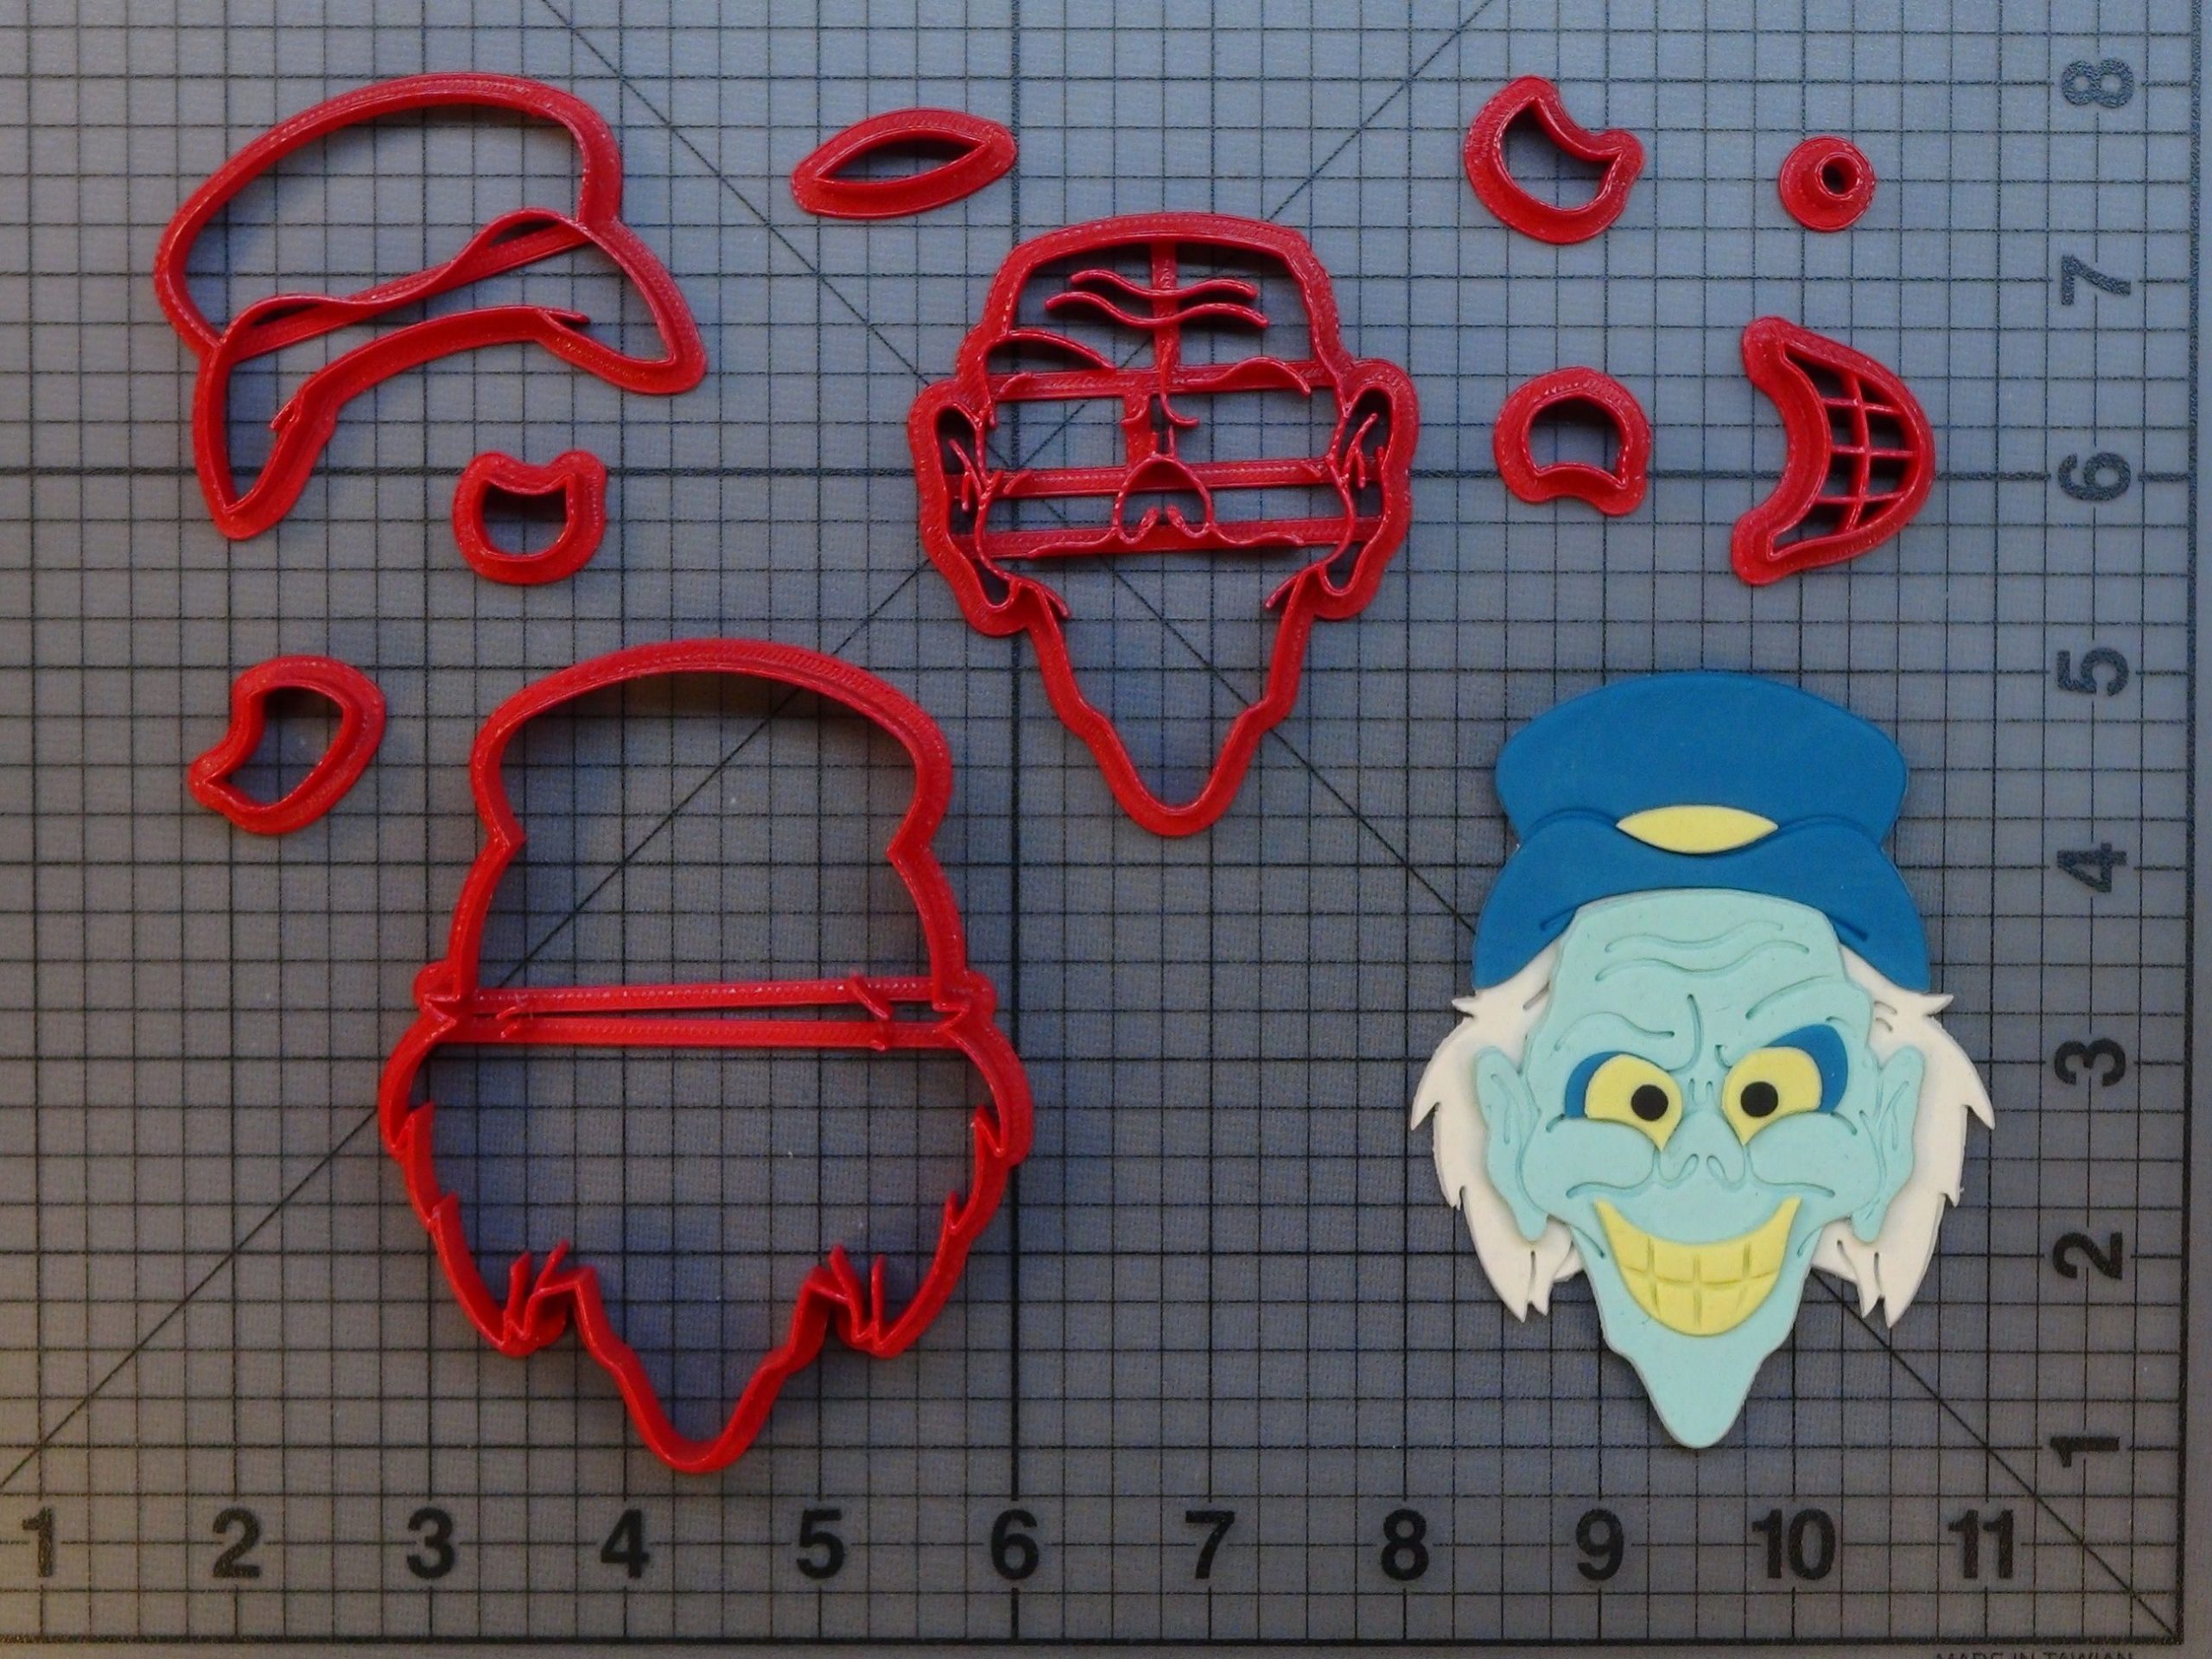 Hitchhiking Ghost 266-b788 Cookie Cutter Set - Drawing - HD Wallpaper 